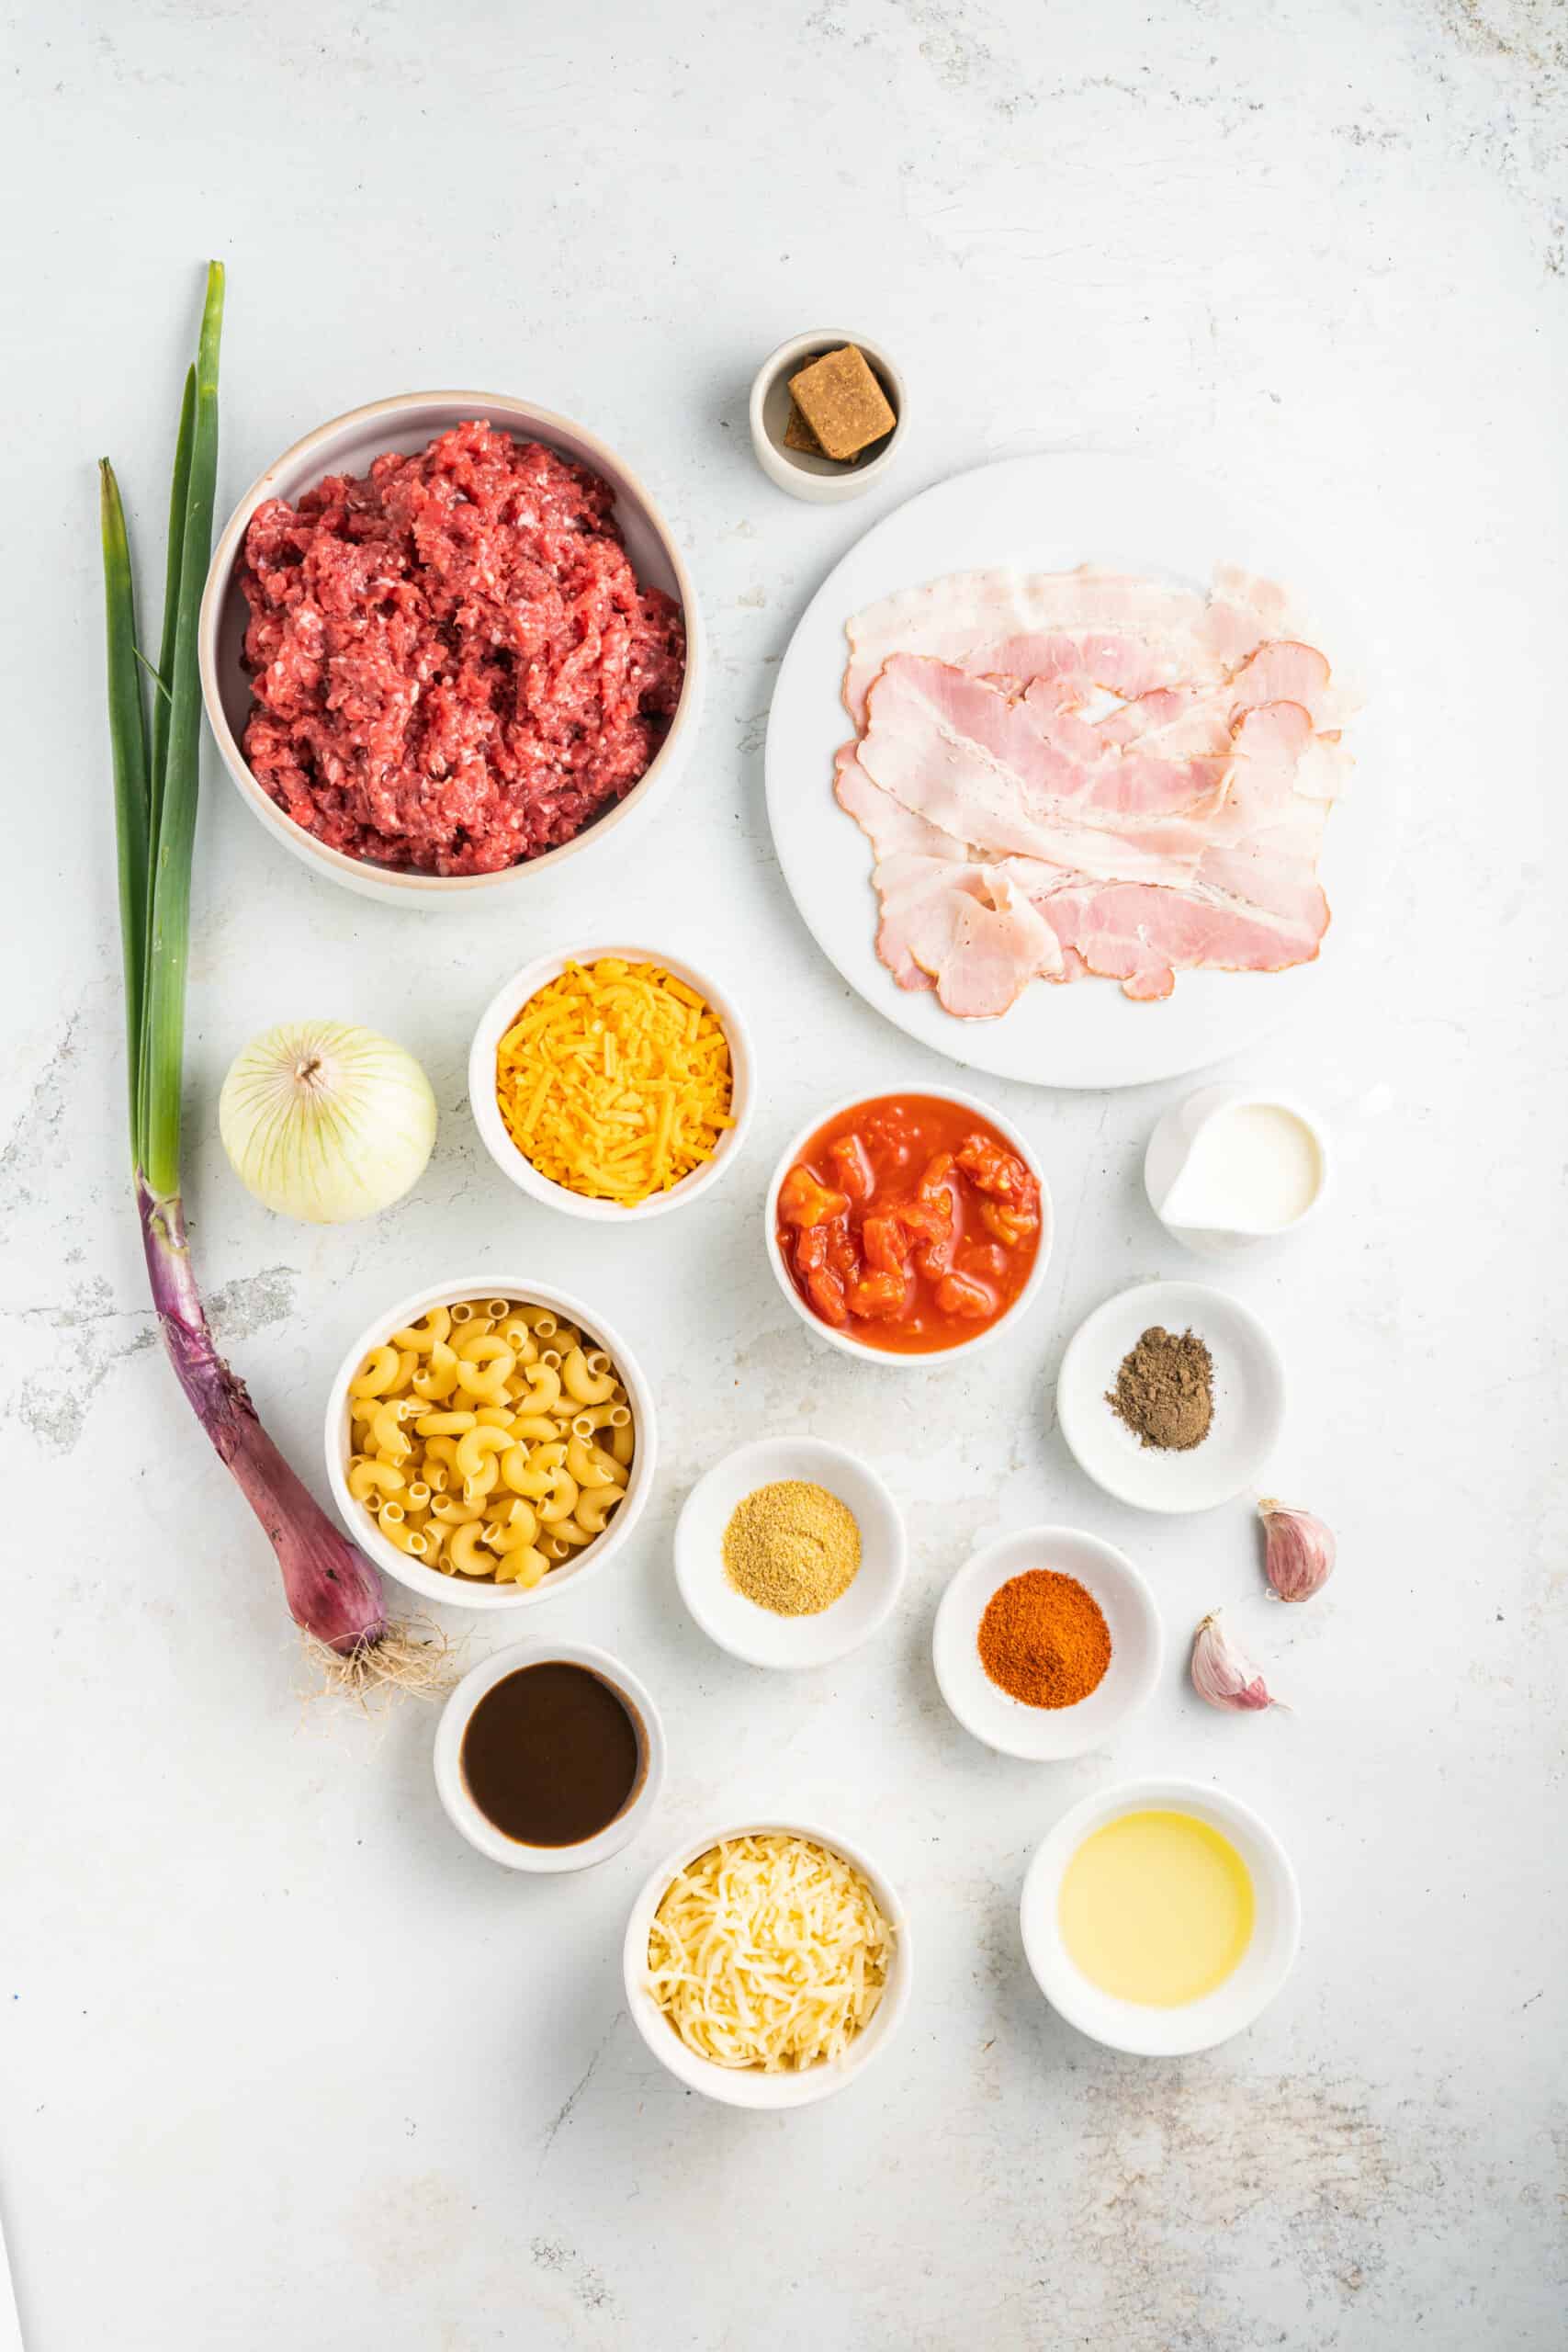 Ingredients for Cheeseburger Casserole Recipe
